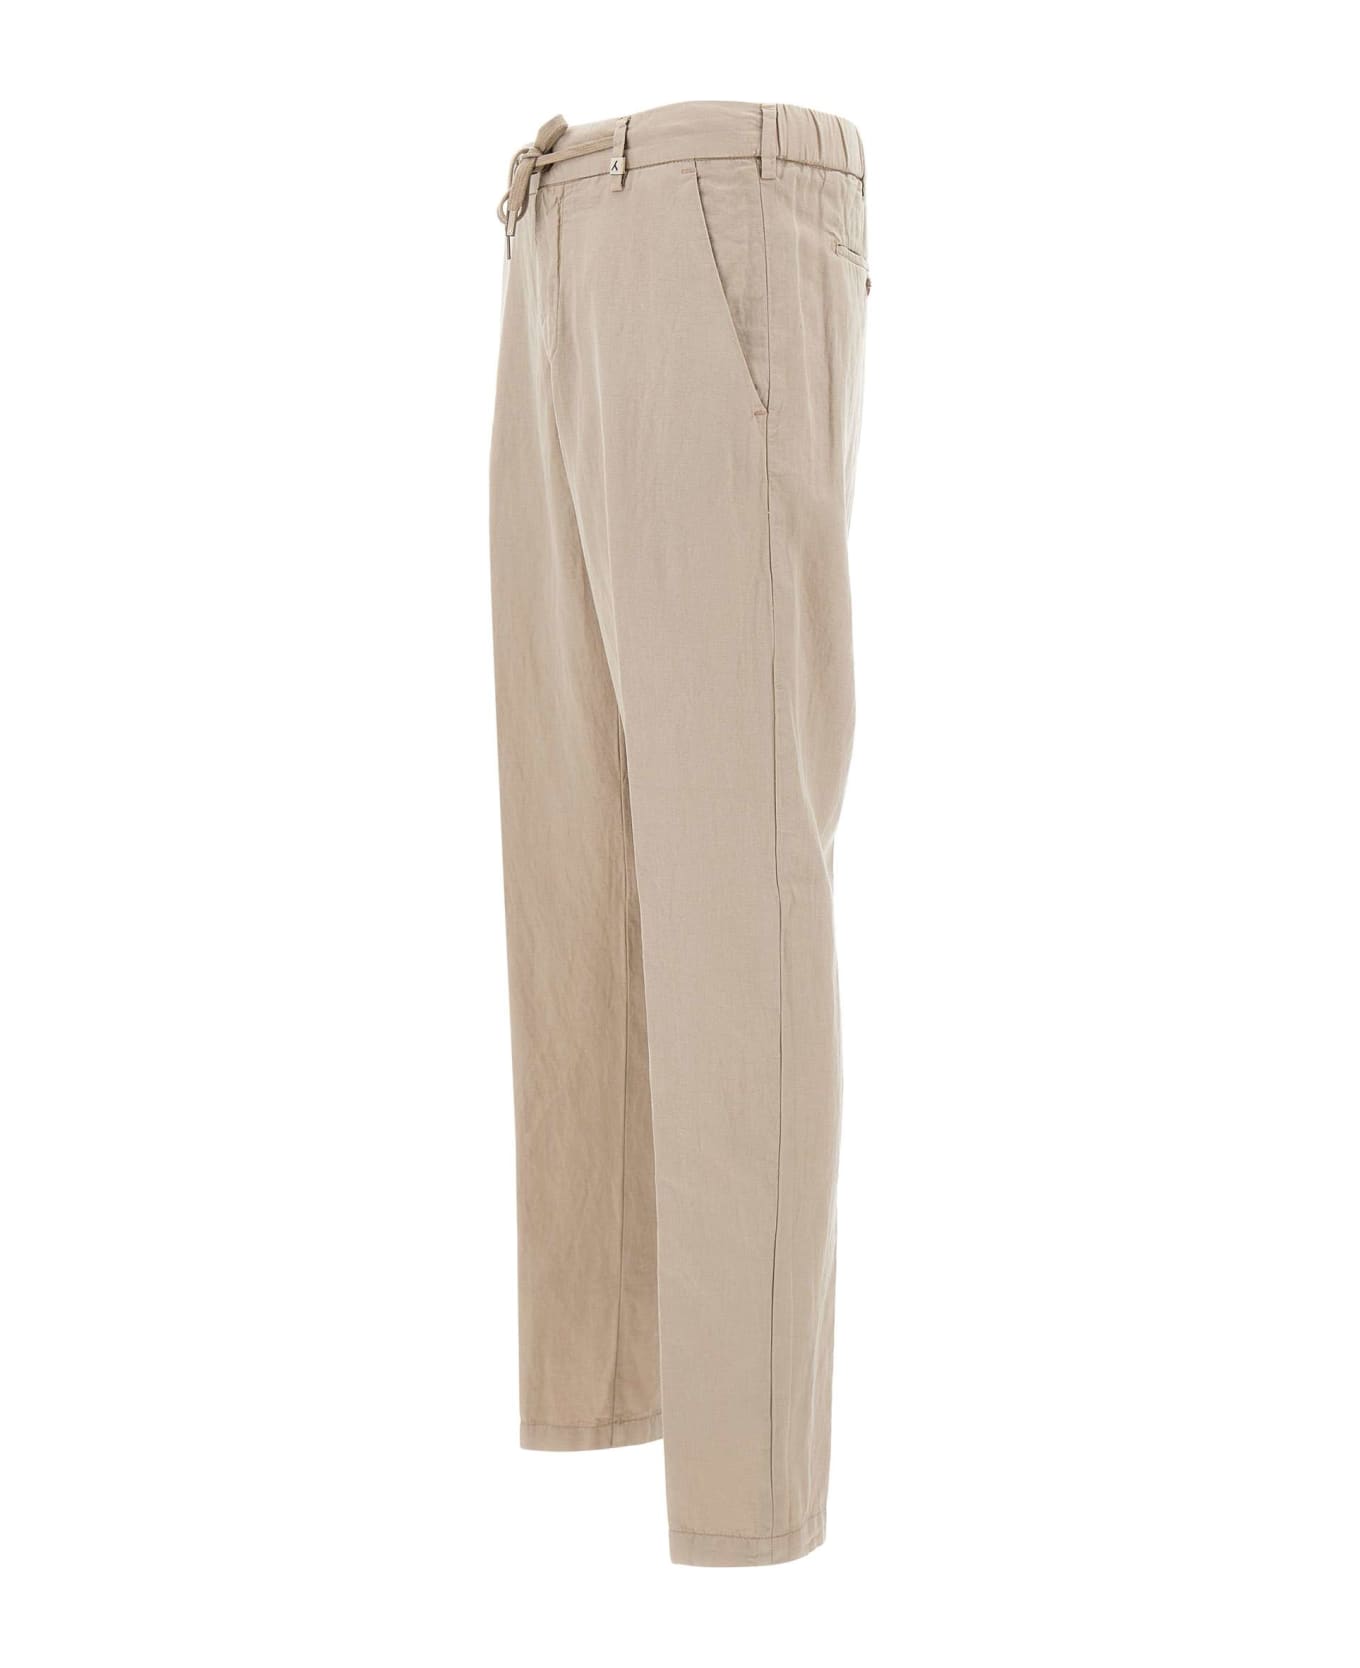 Myths 'apollo' Linen And Cotton Trousers